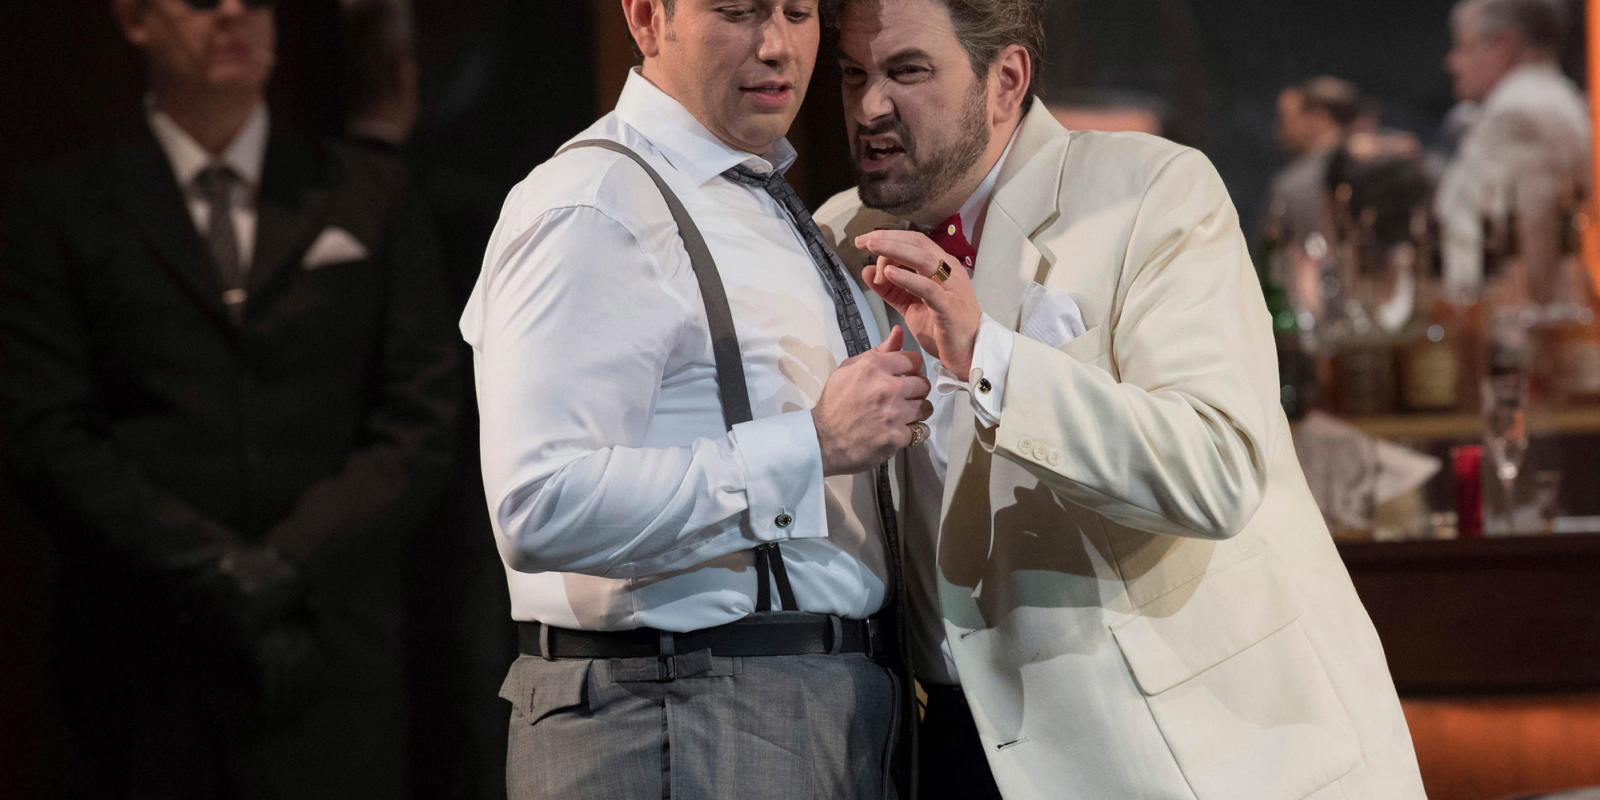 close up of two men in suits from ENO's Rigoletto